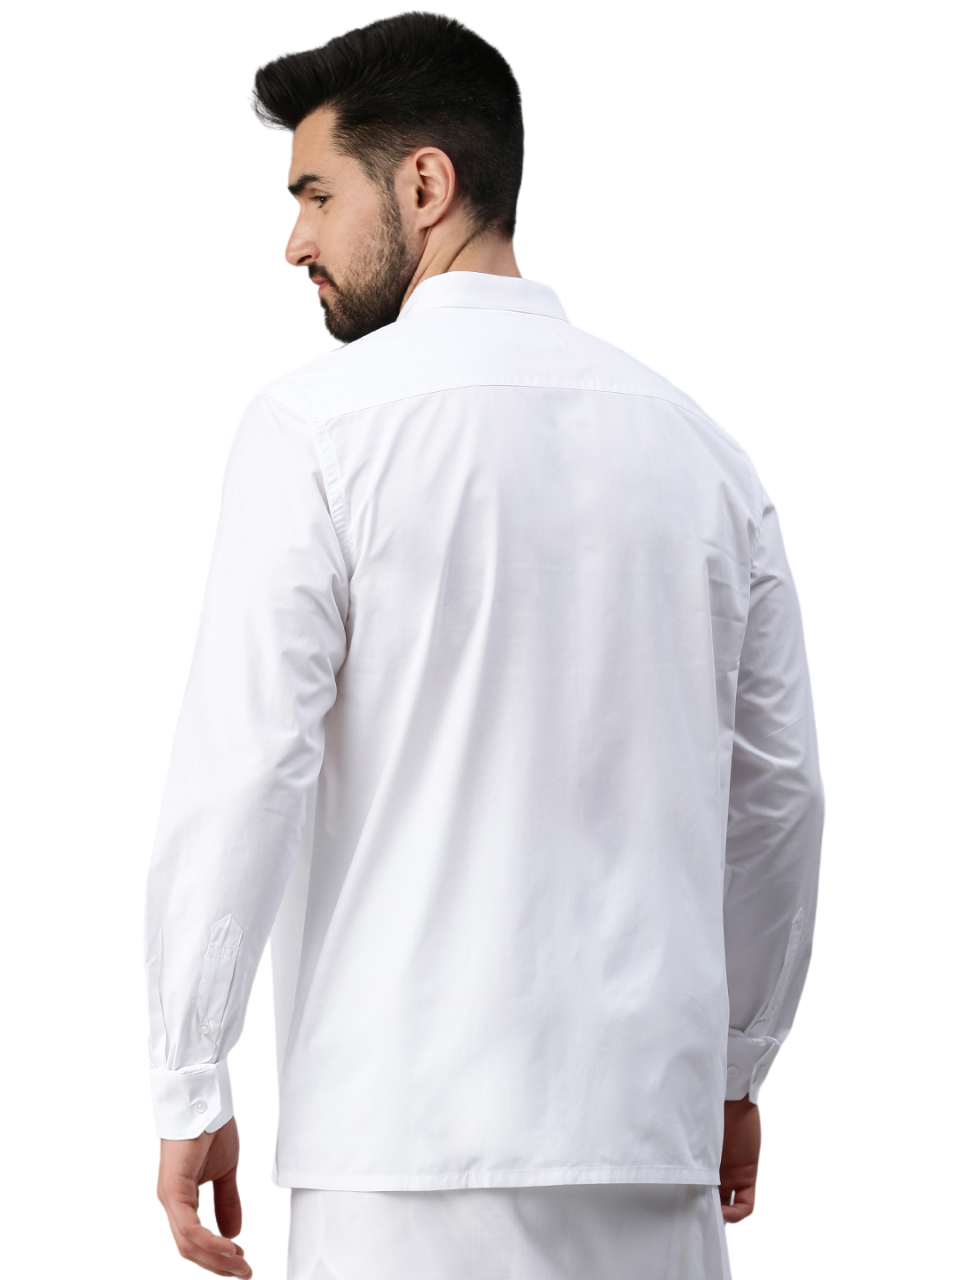 Mens 100% Cotton White Shirt Full Sleeves Chinese Collar-Back view